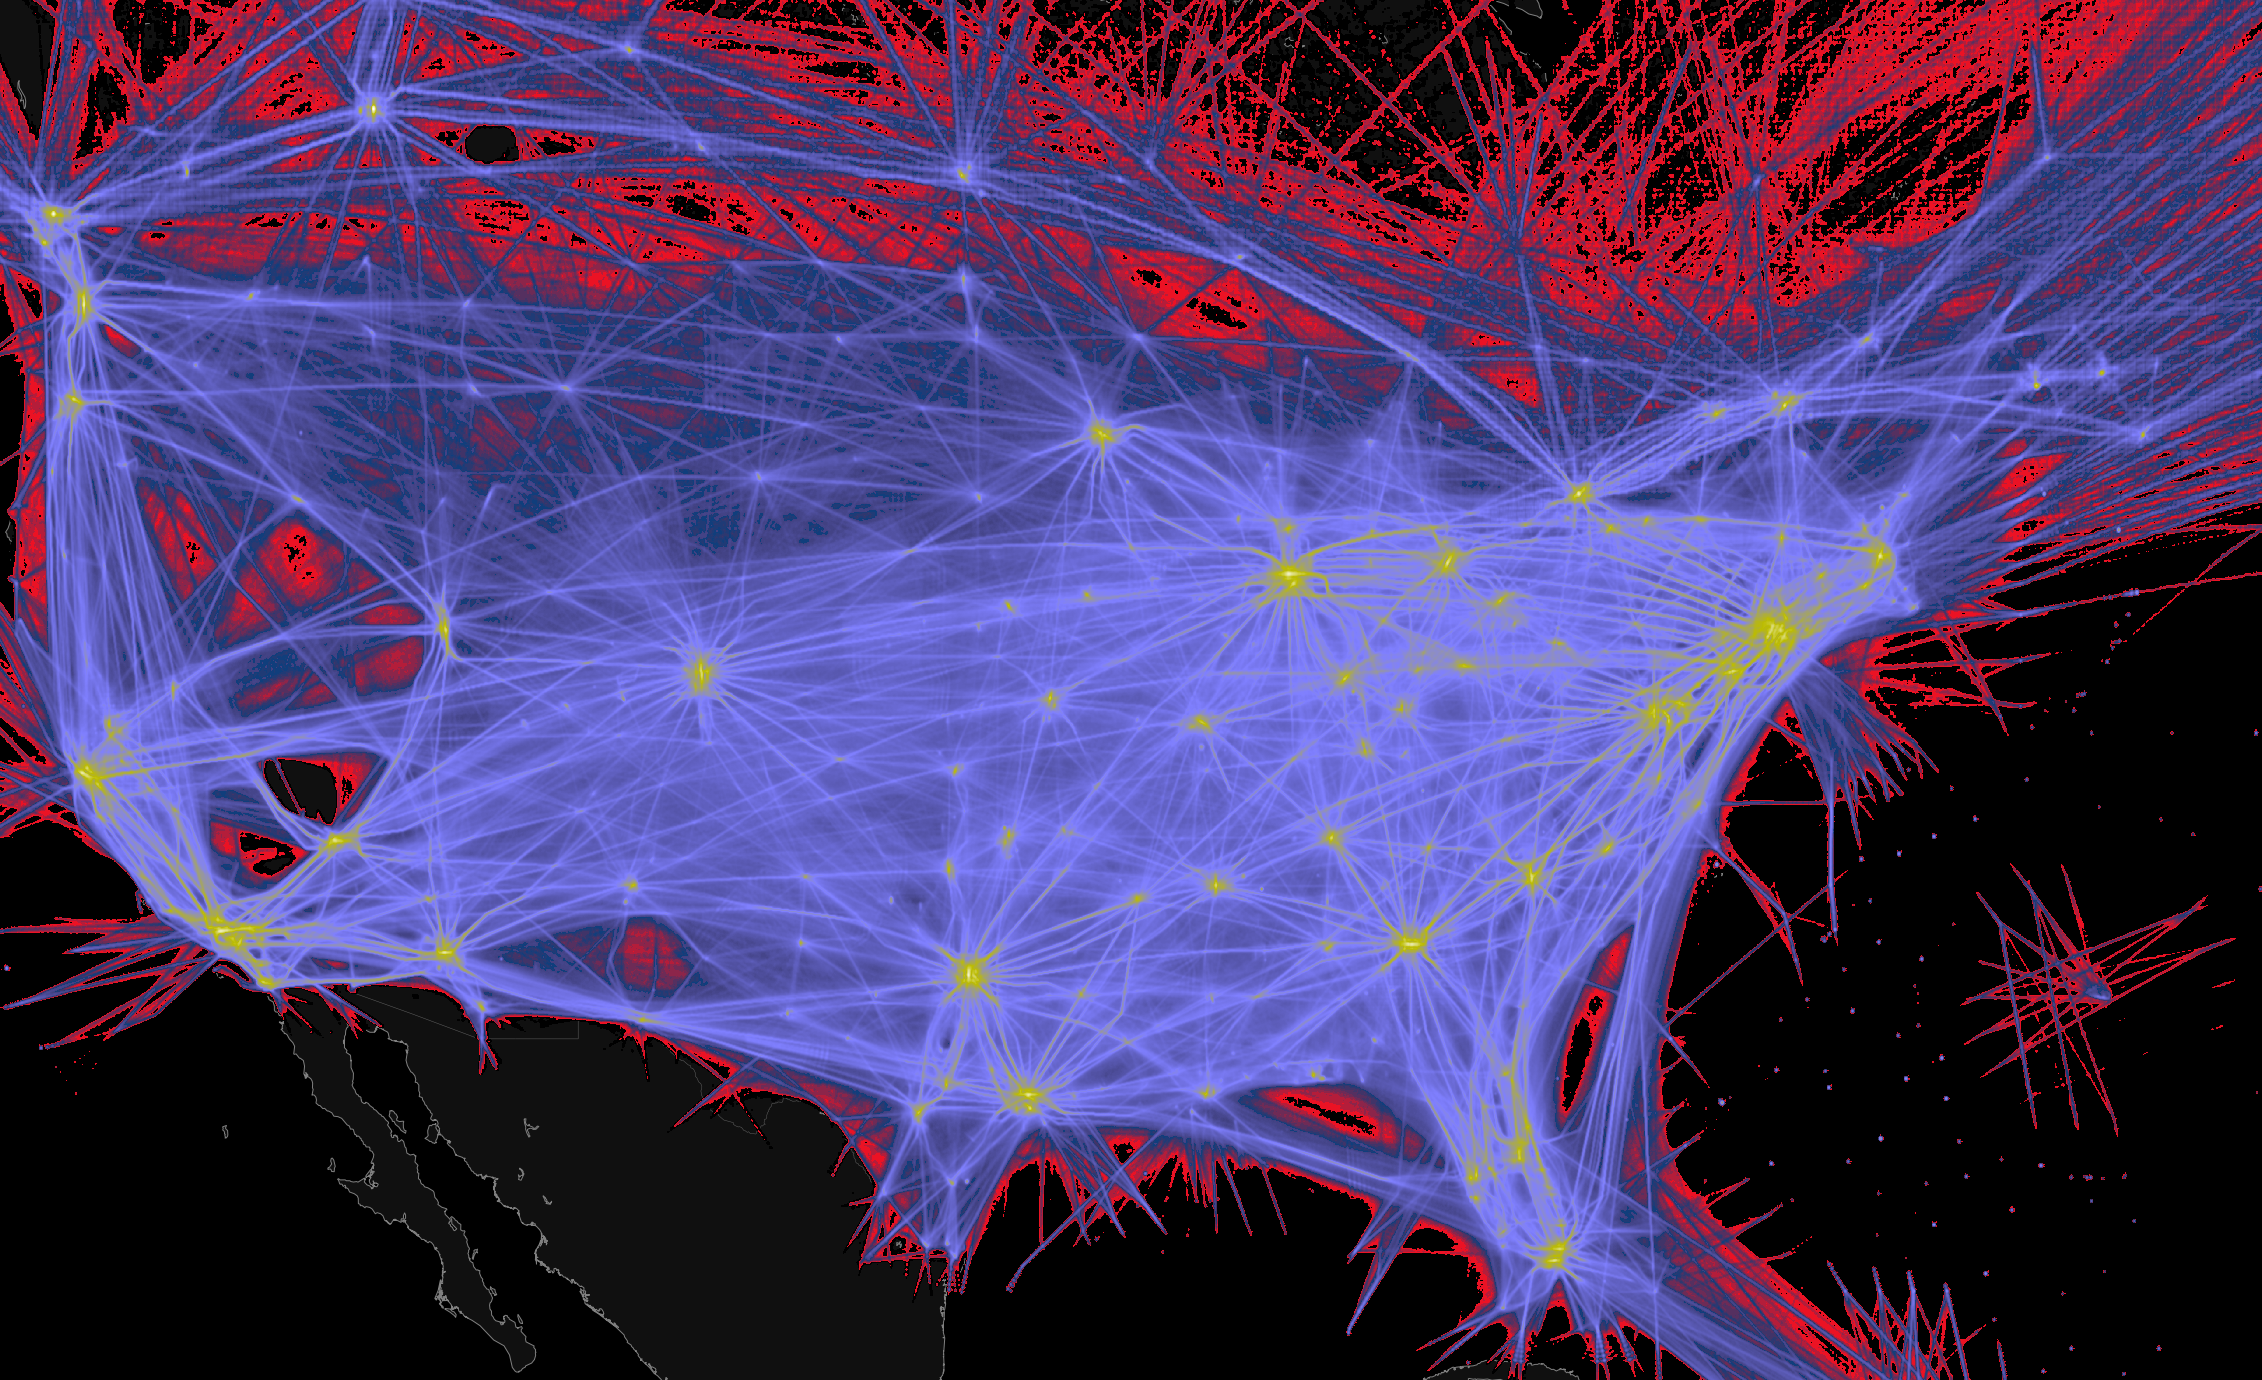 Spectral map of US airtraffic